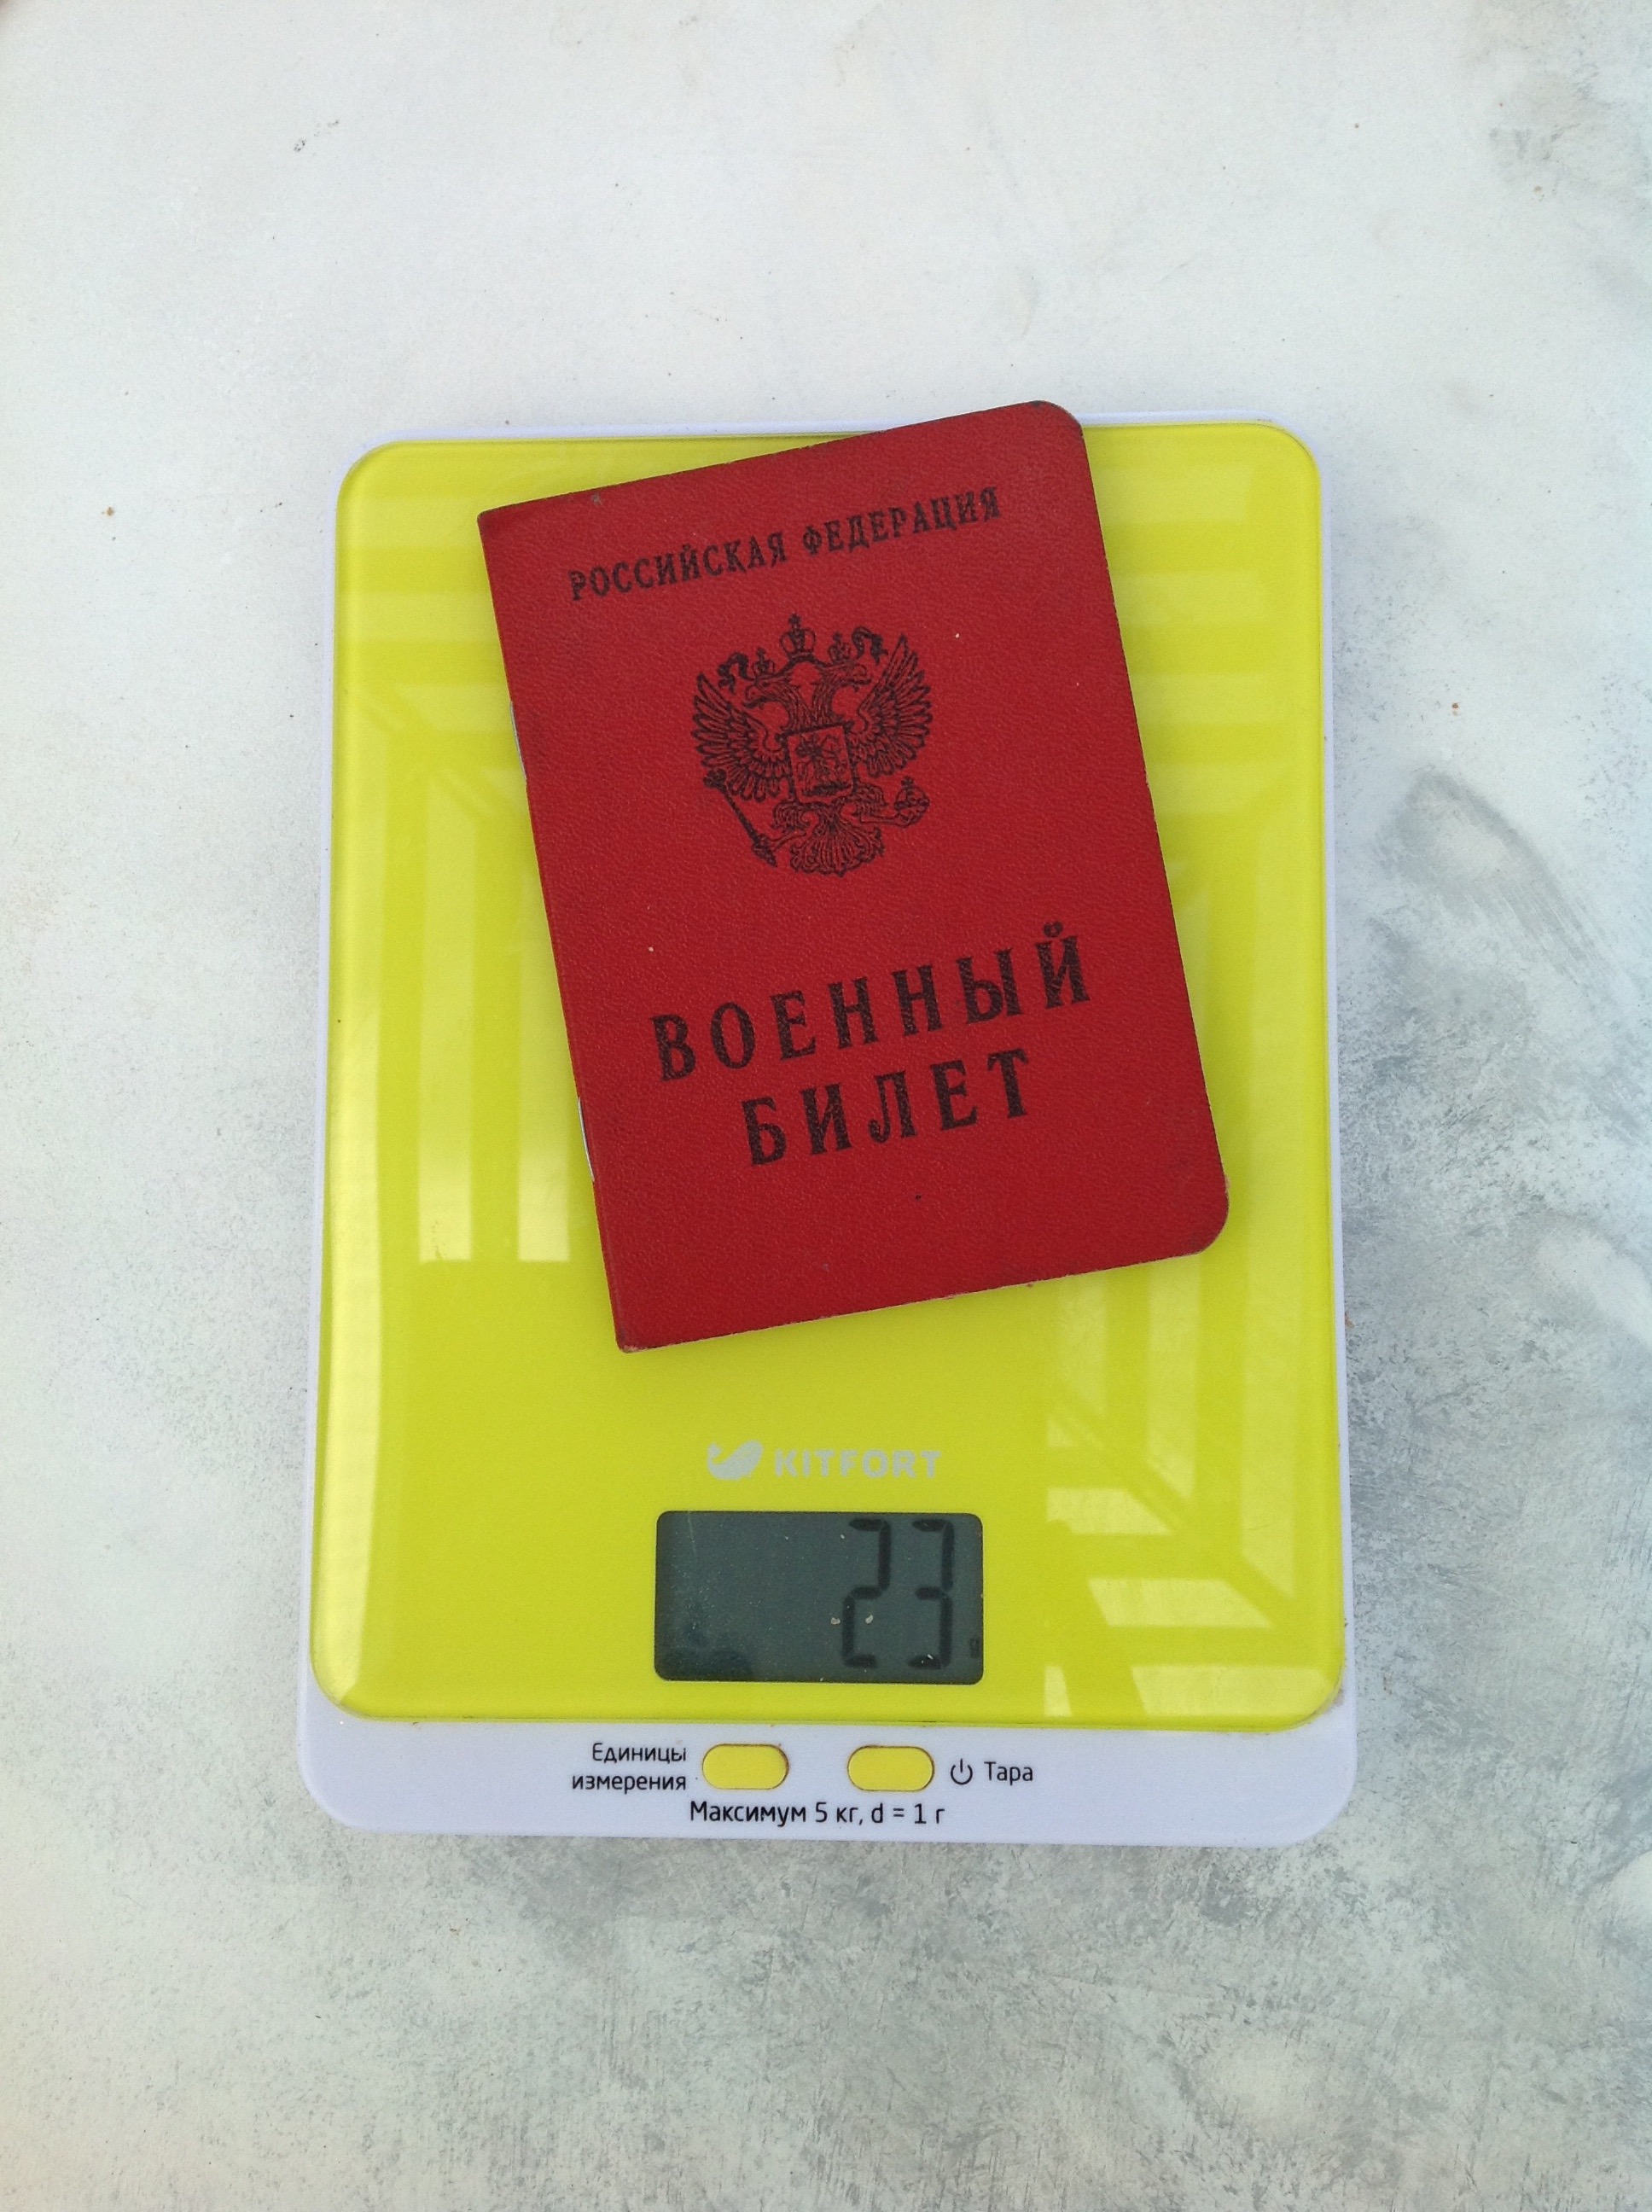 military ticket weight